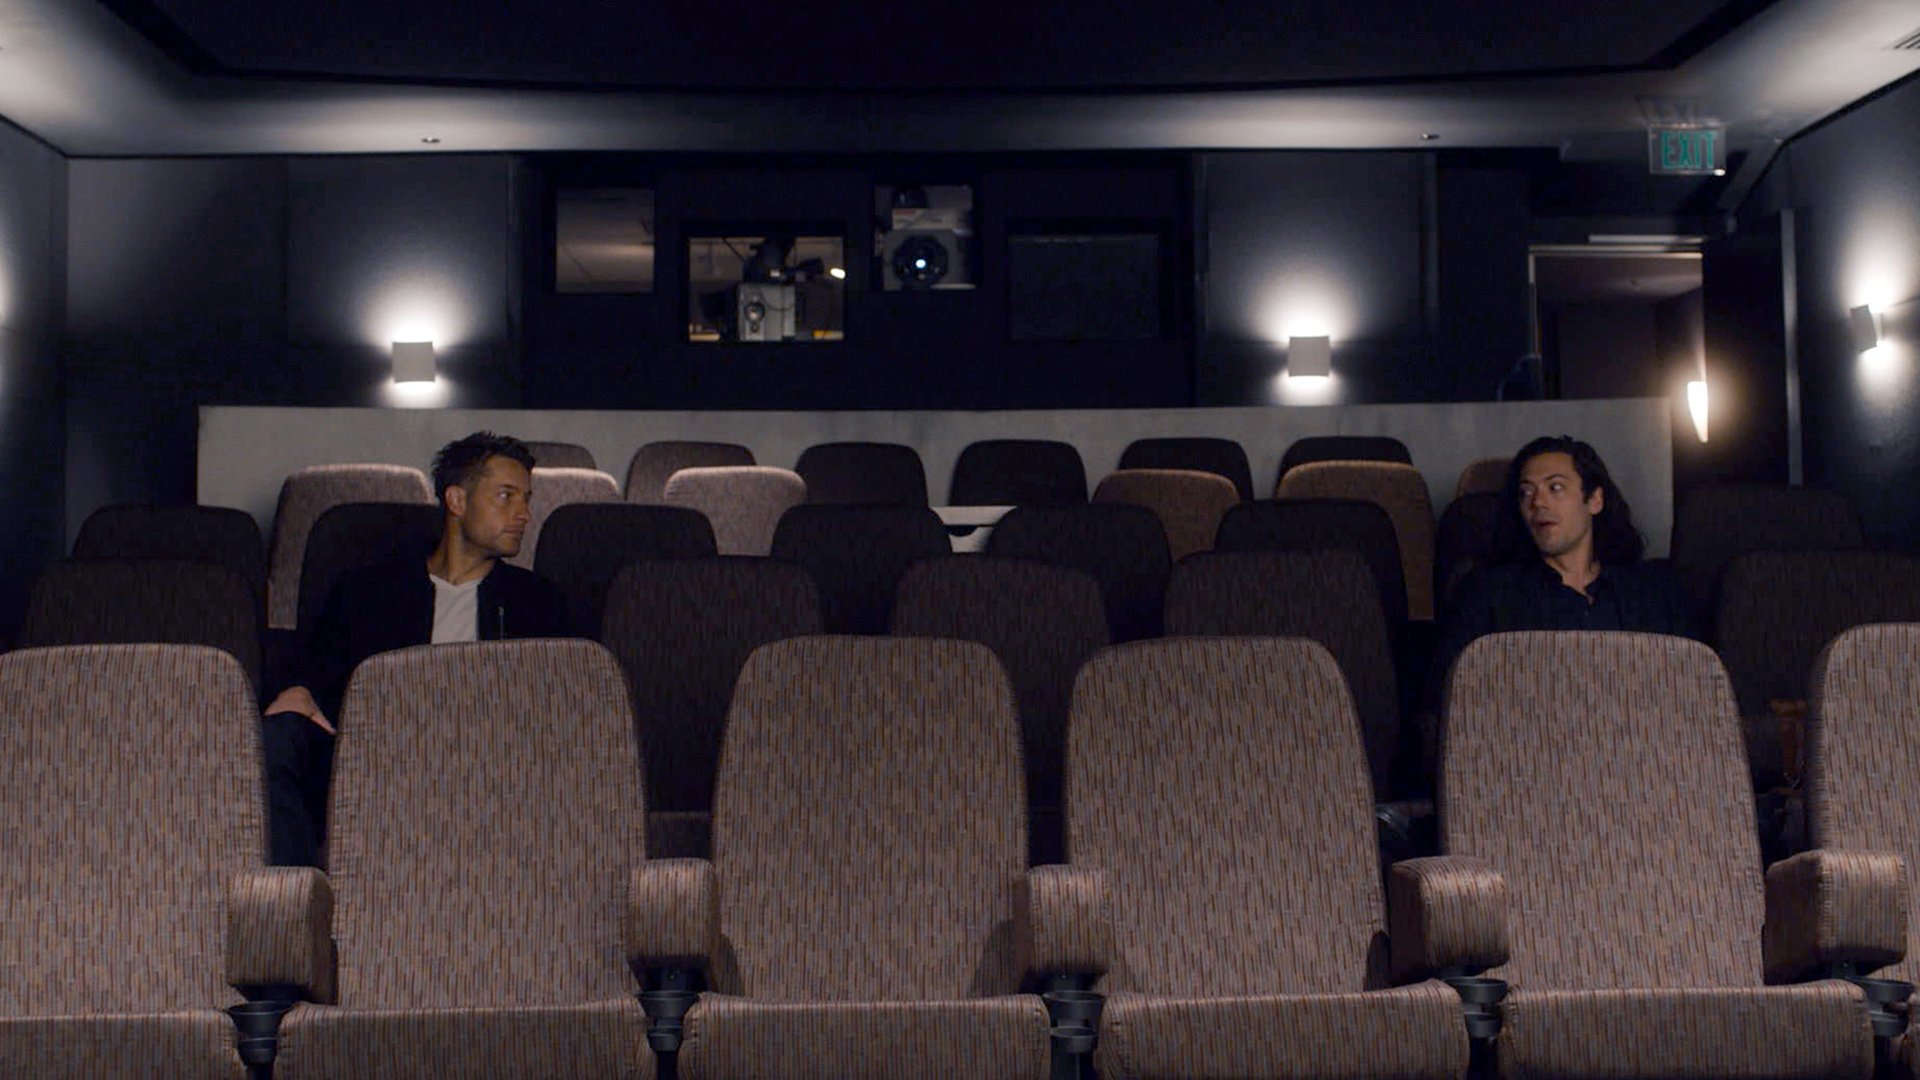 Justin Hartley as Kevin and Stephen Friedrich as Jordan Martin Foster sit in a theater together in ‘This Is Us Season 5 Episode 14